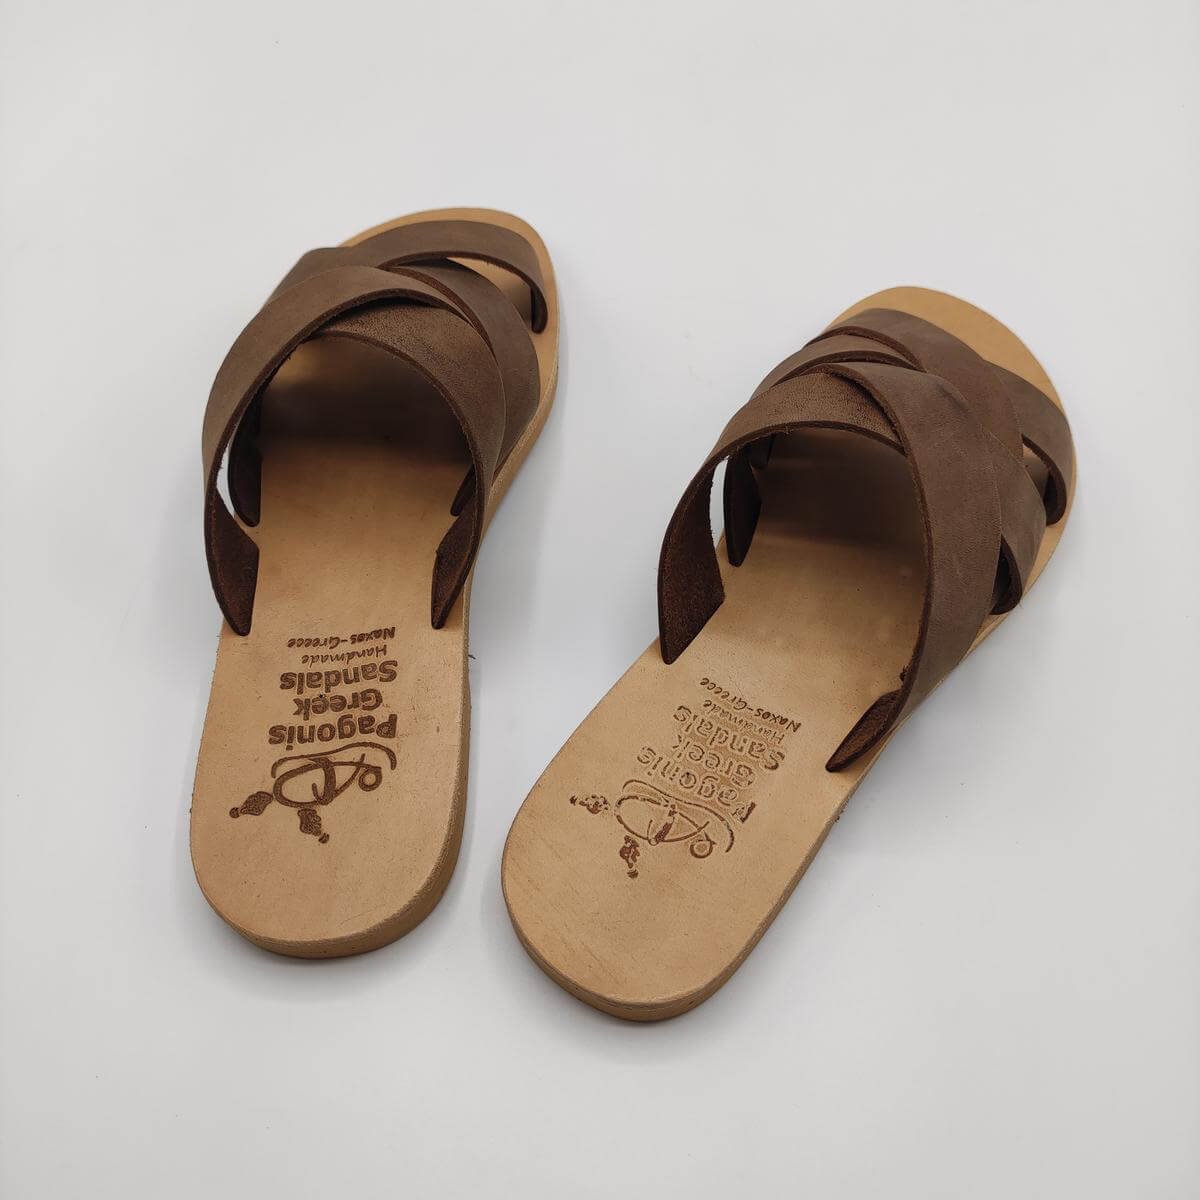 Criss Cross Woven Leather Slides Pagonis Nubuck Brown